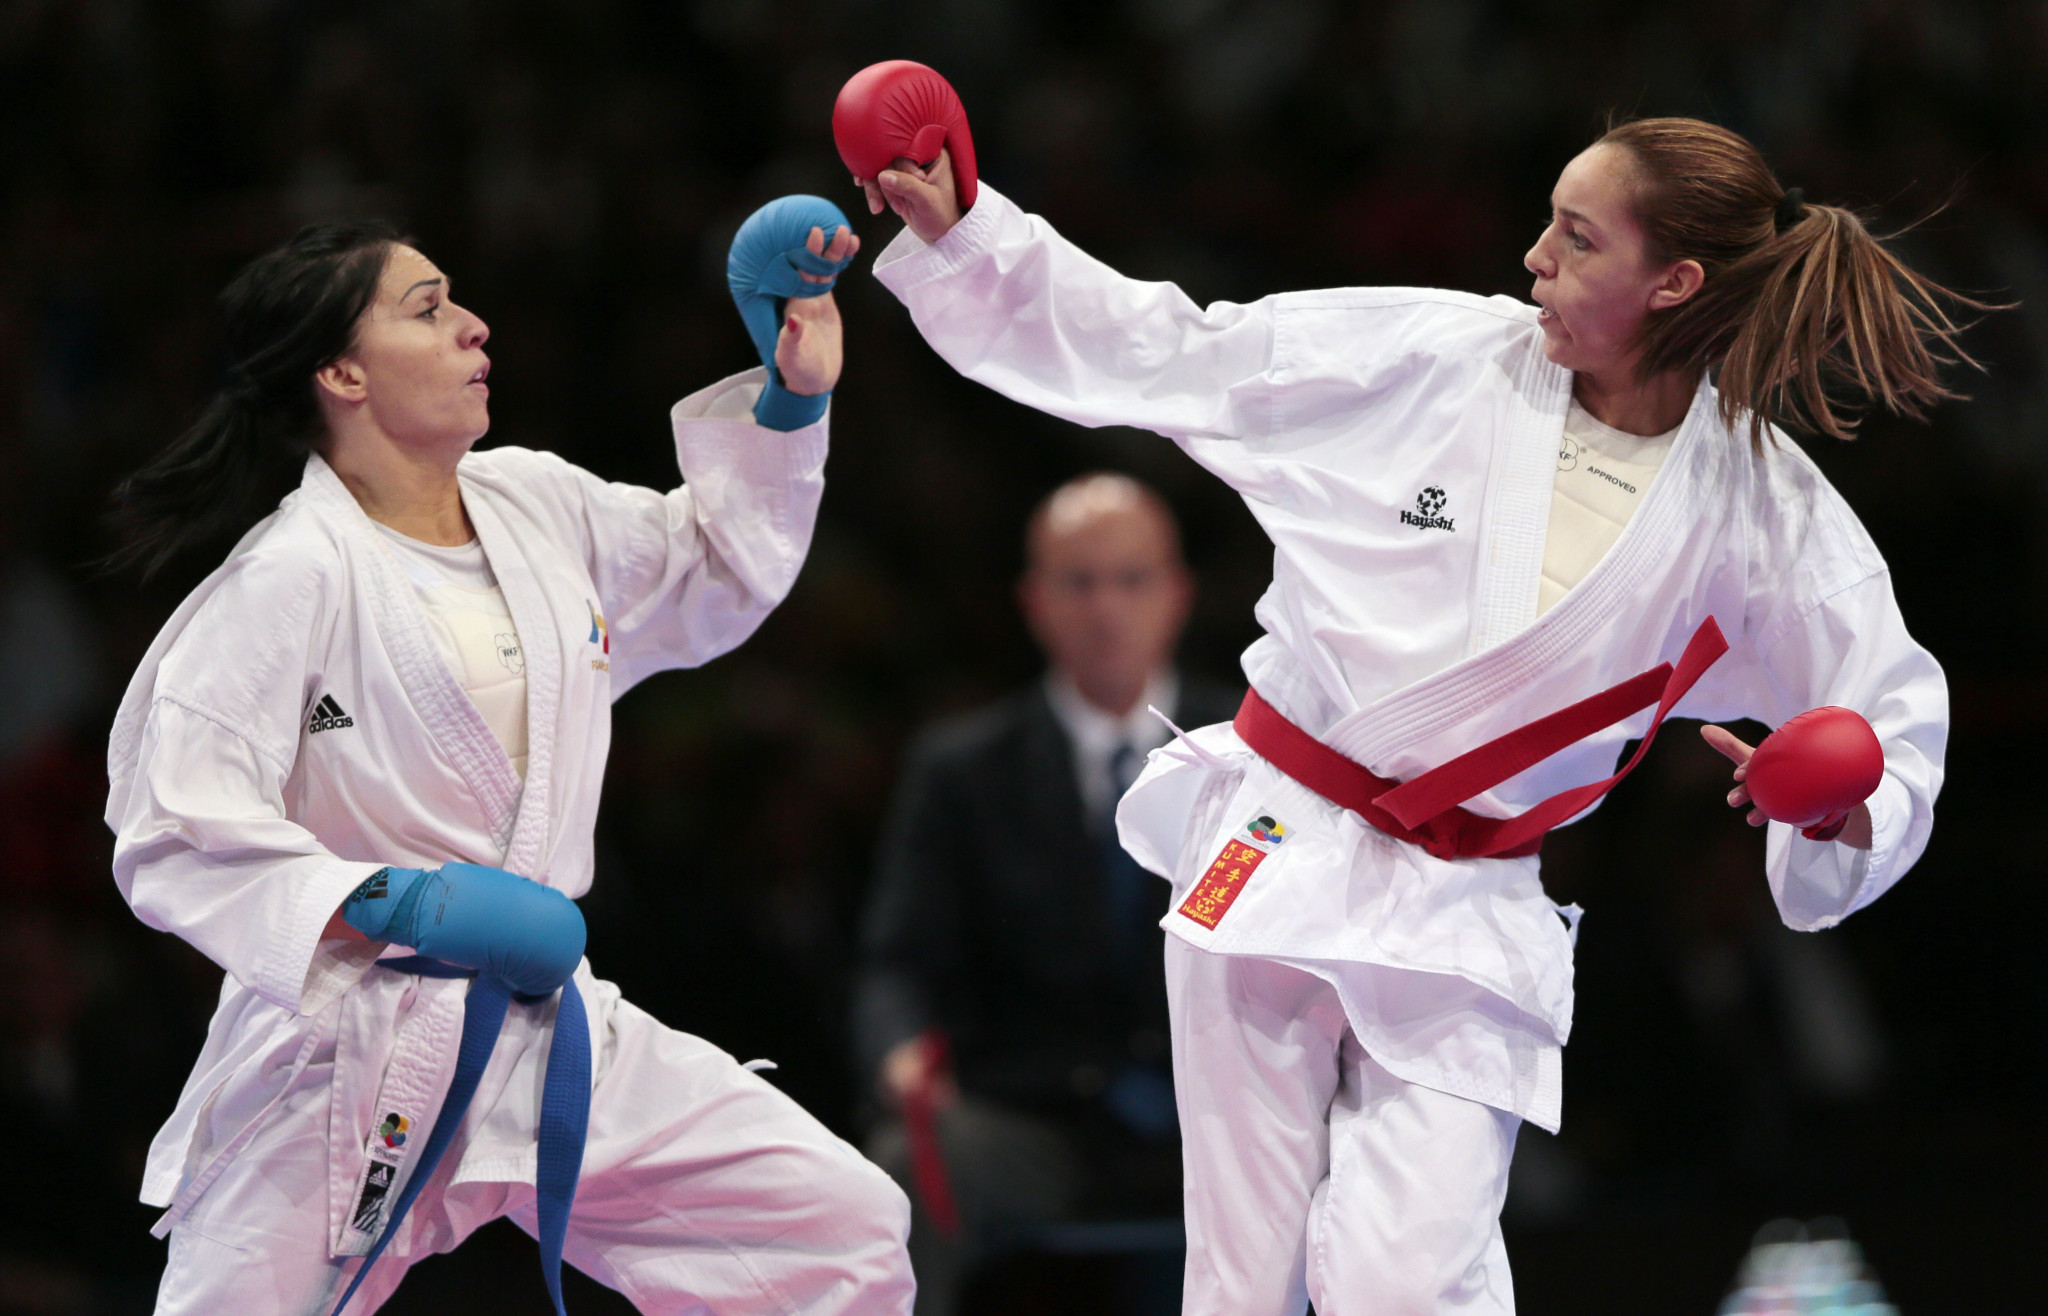 Boutheina Hasnaoui, right, won silver at the 2012 World Karate Championships in Paris ©Getty Images